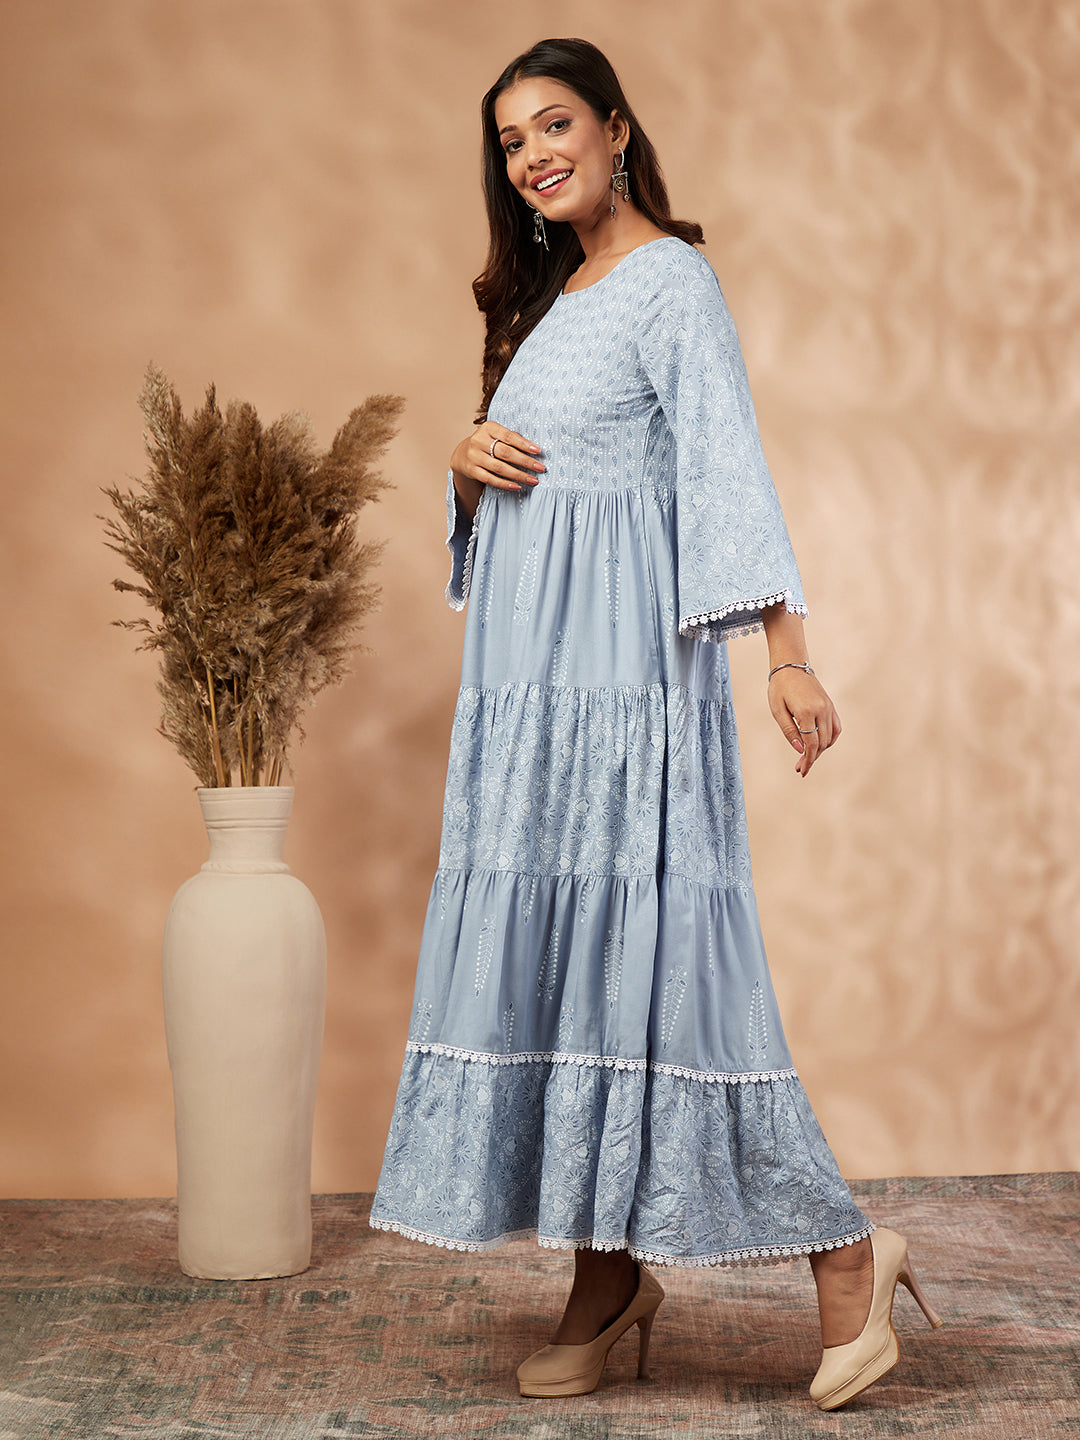 Blue Printed Tiered Long Dress